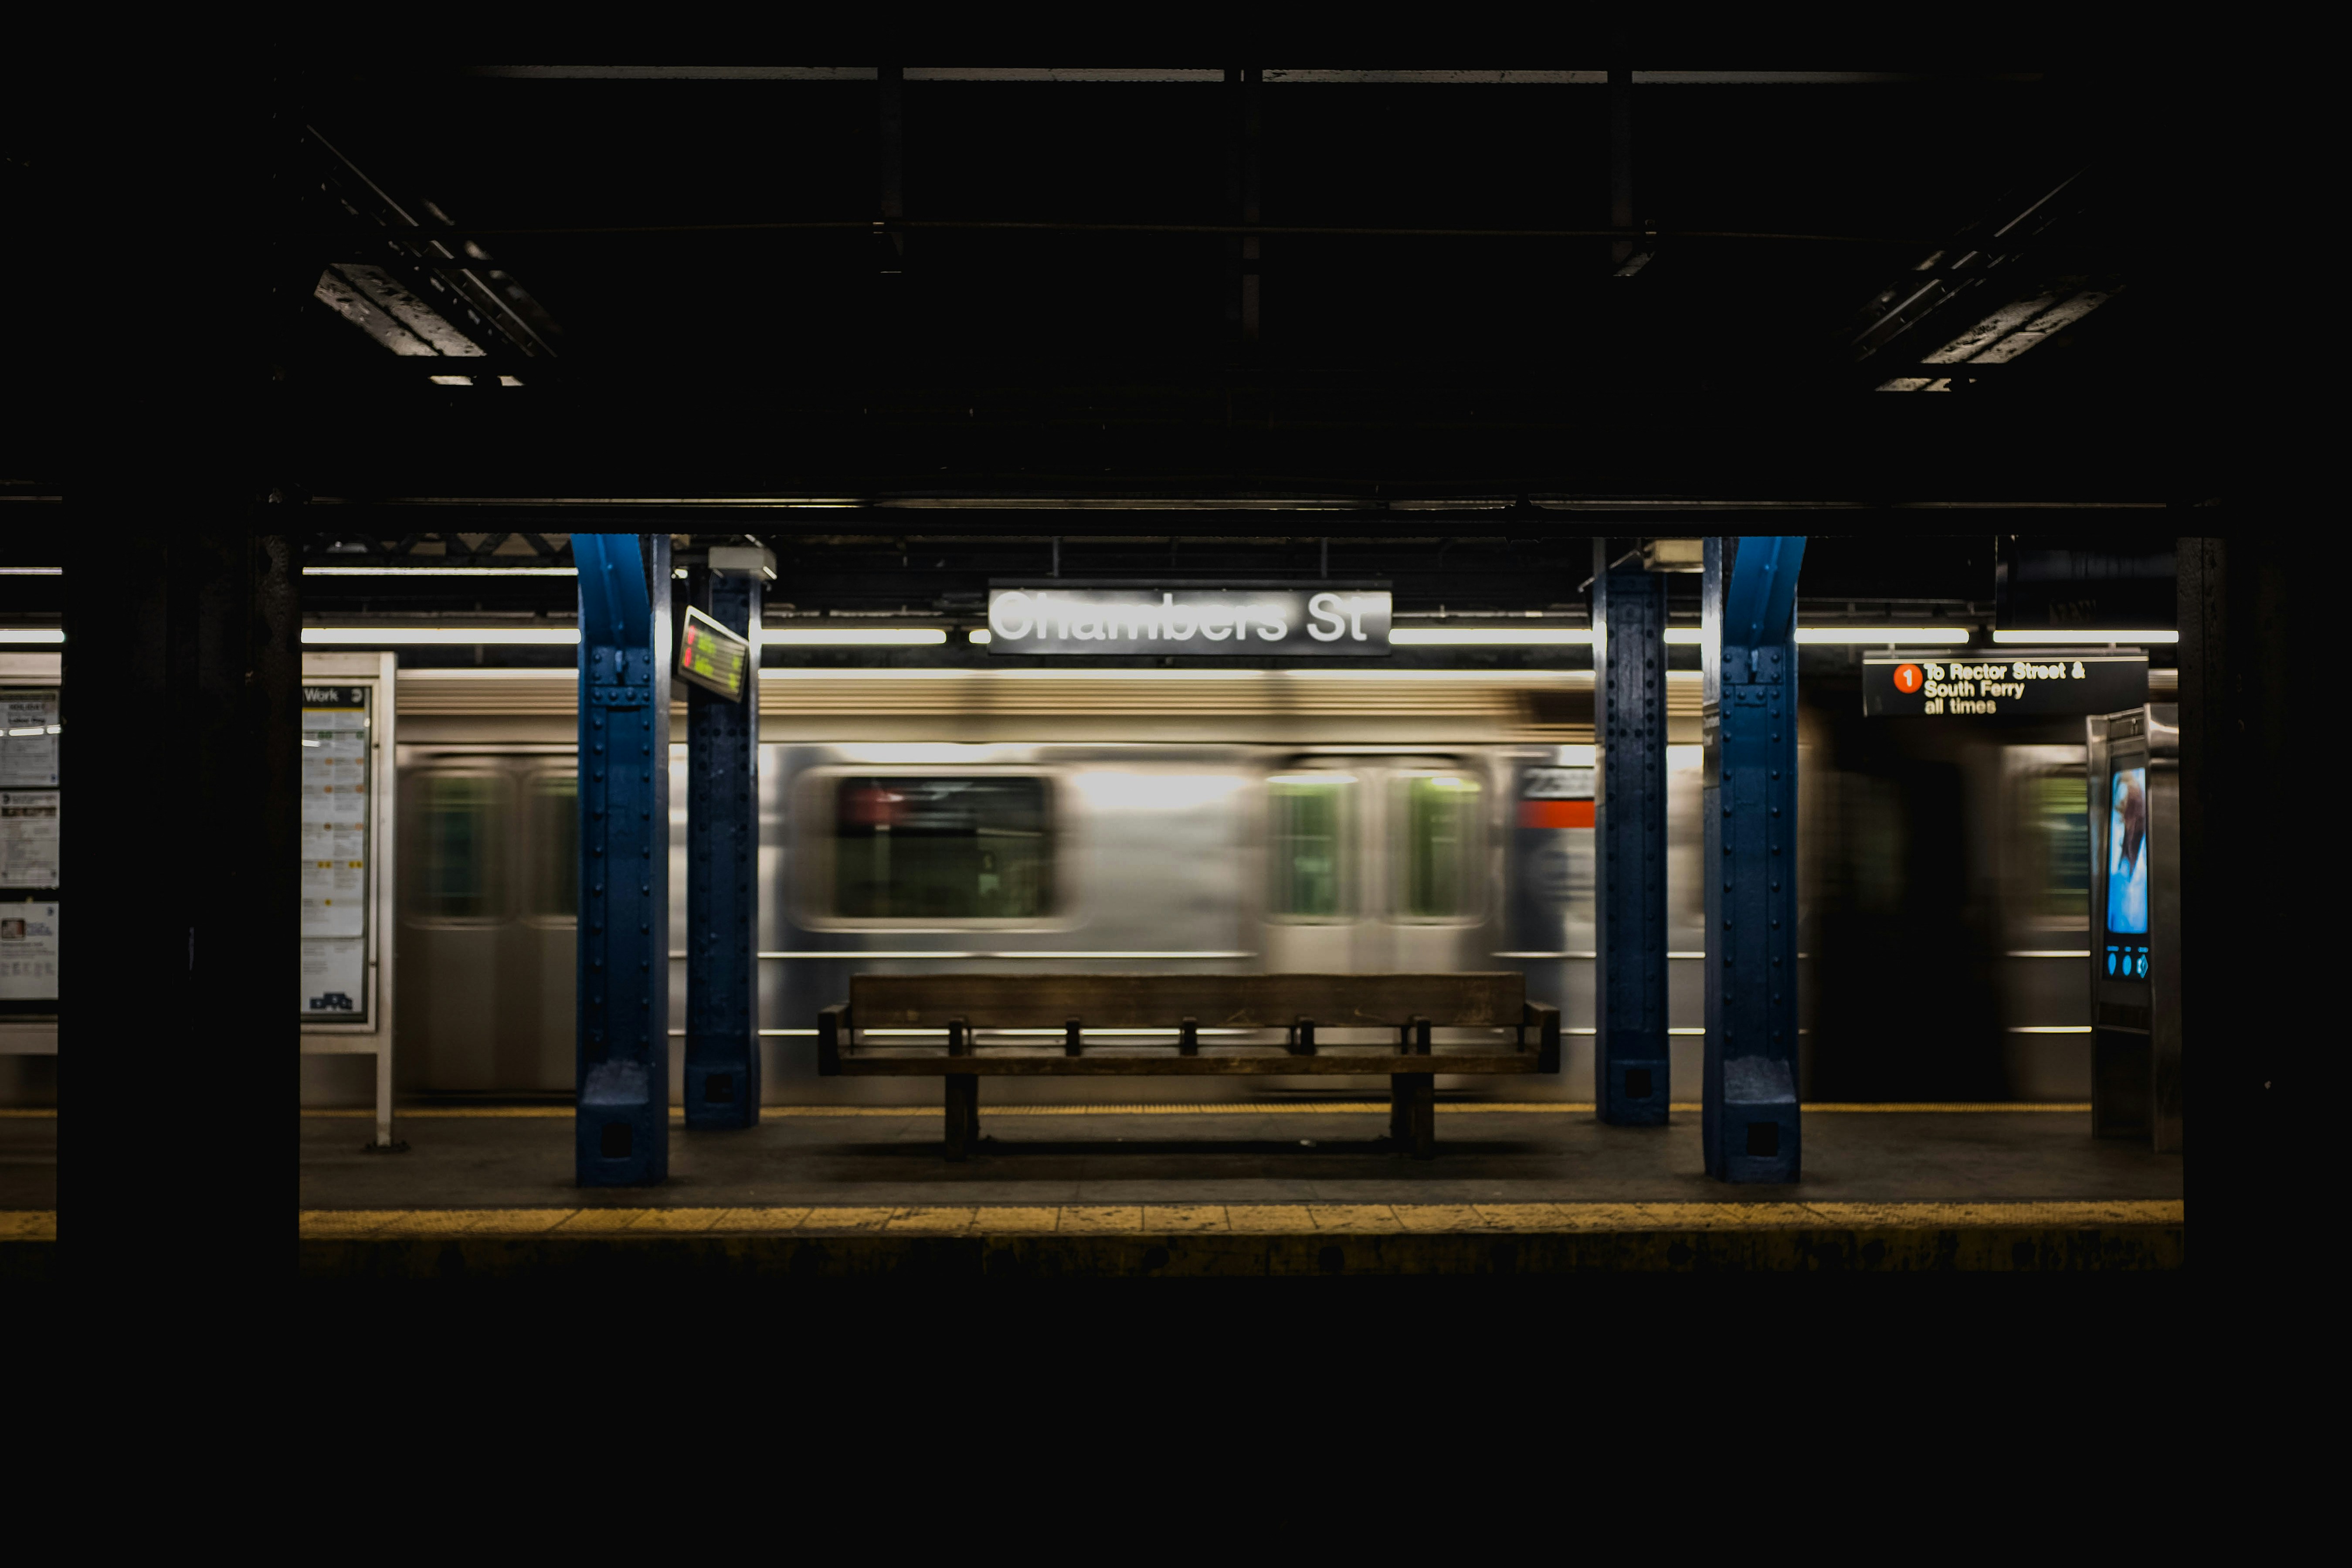 A subway passes through the Chambers Street station.